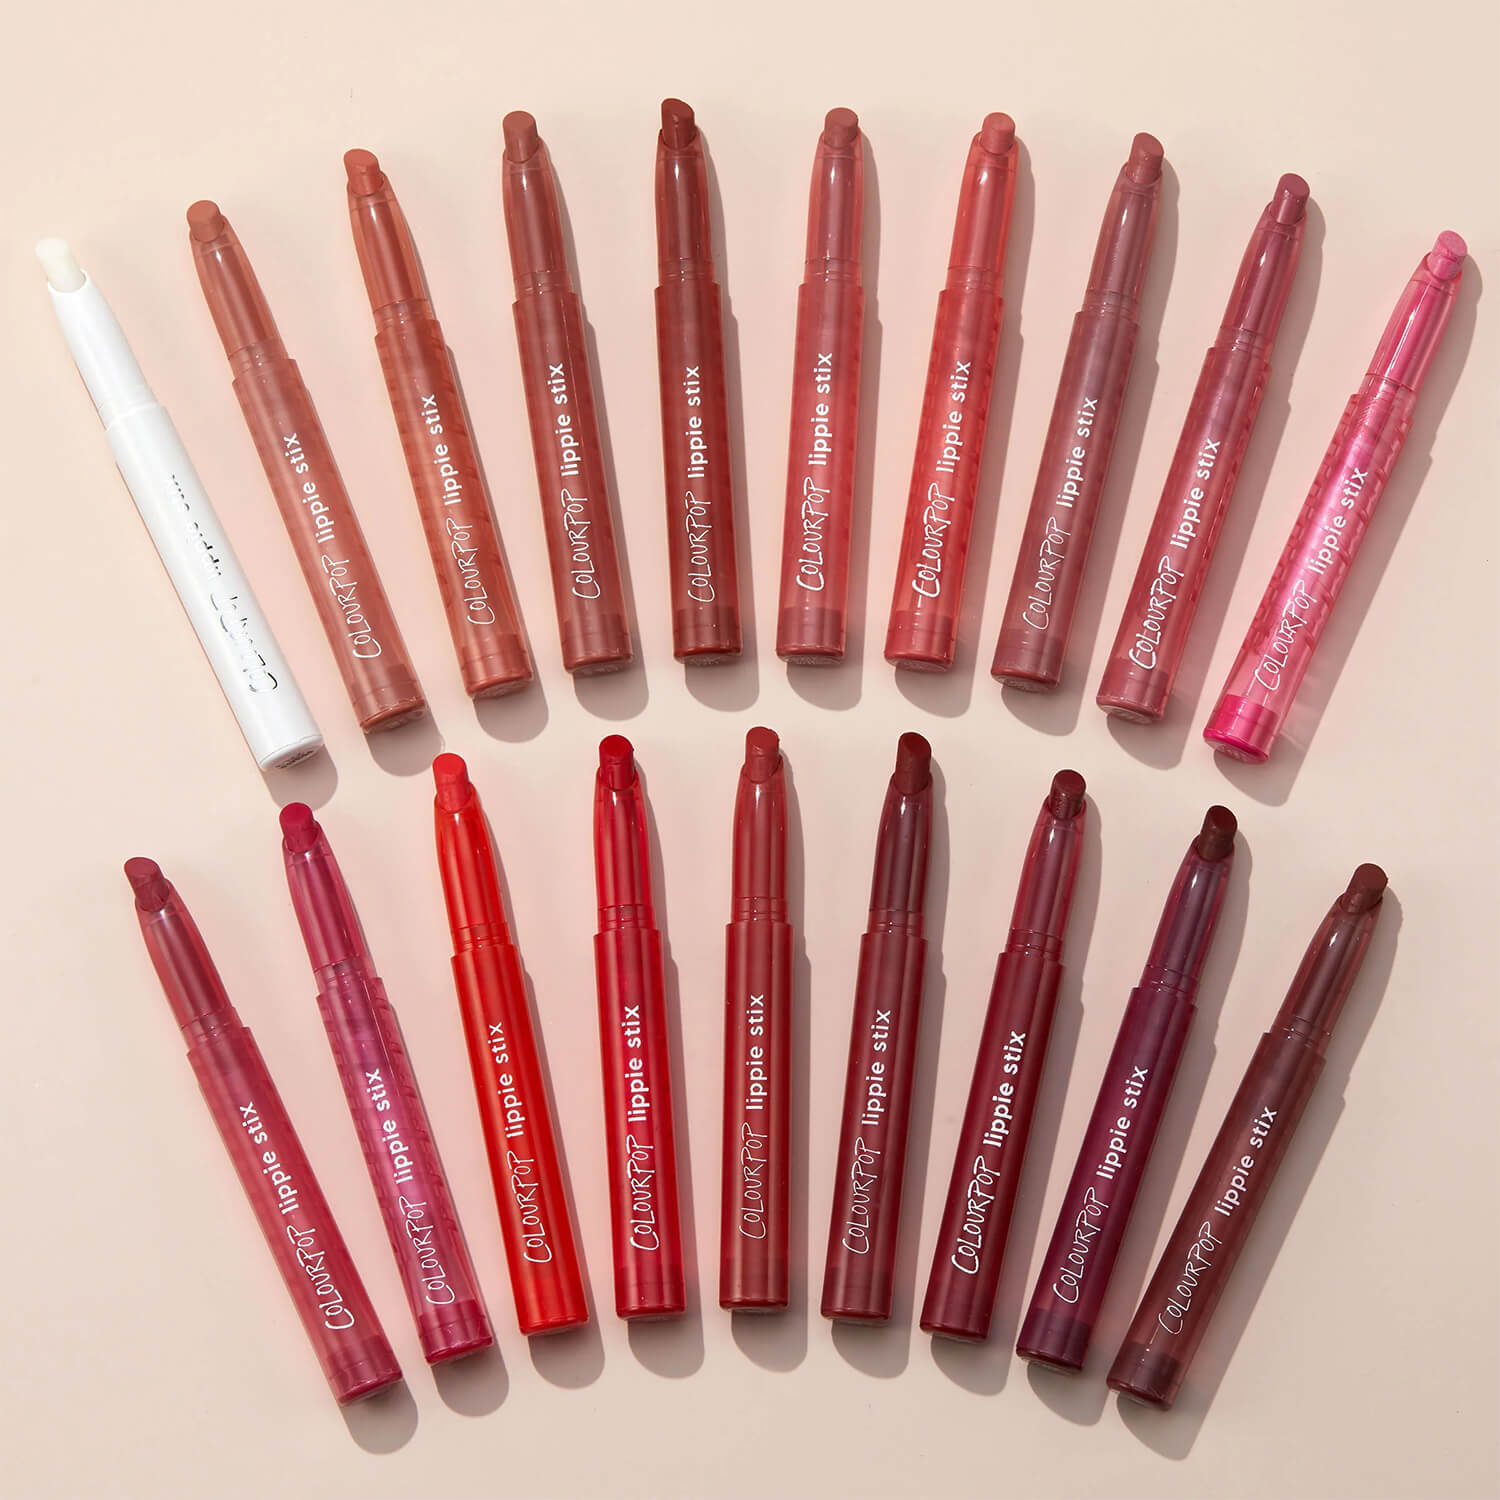 Shop Colourpop Essentialy Yours Lippie Stix Stash cup available at Heygirl.pk for delivery in Pakistan